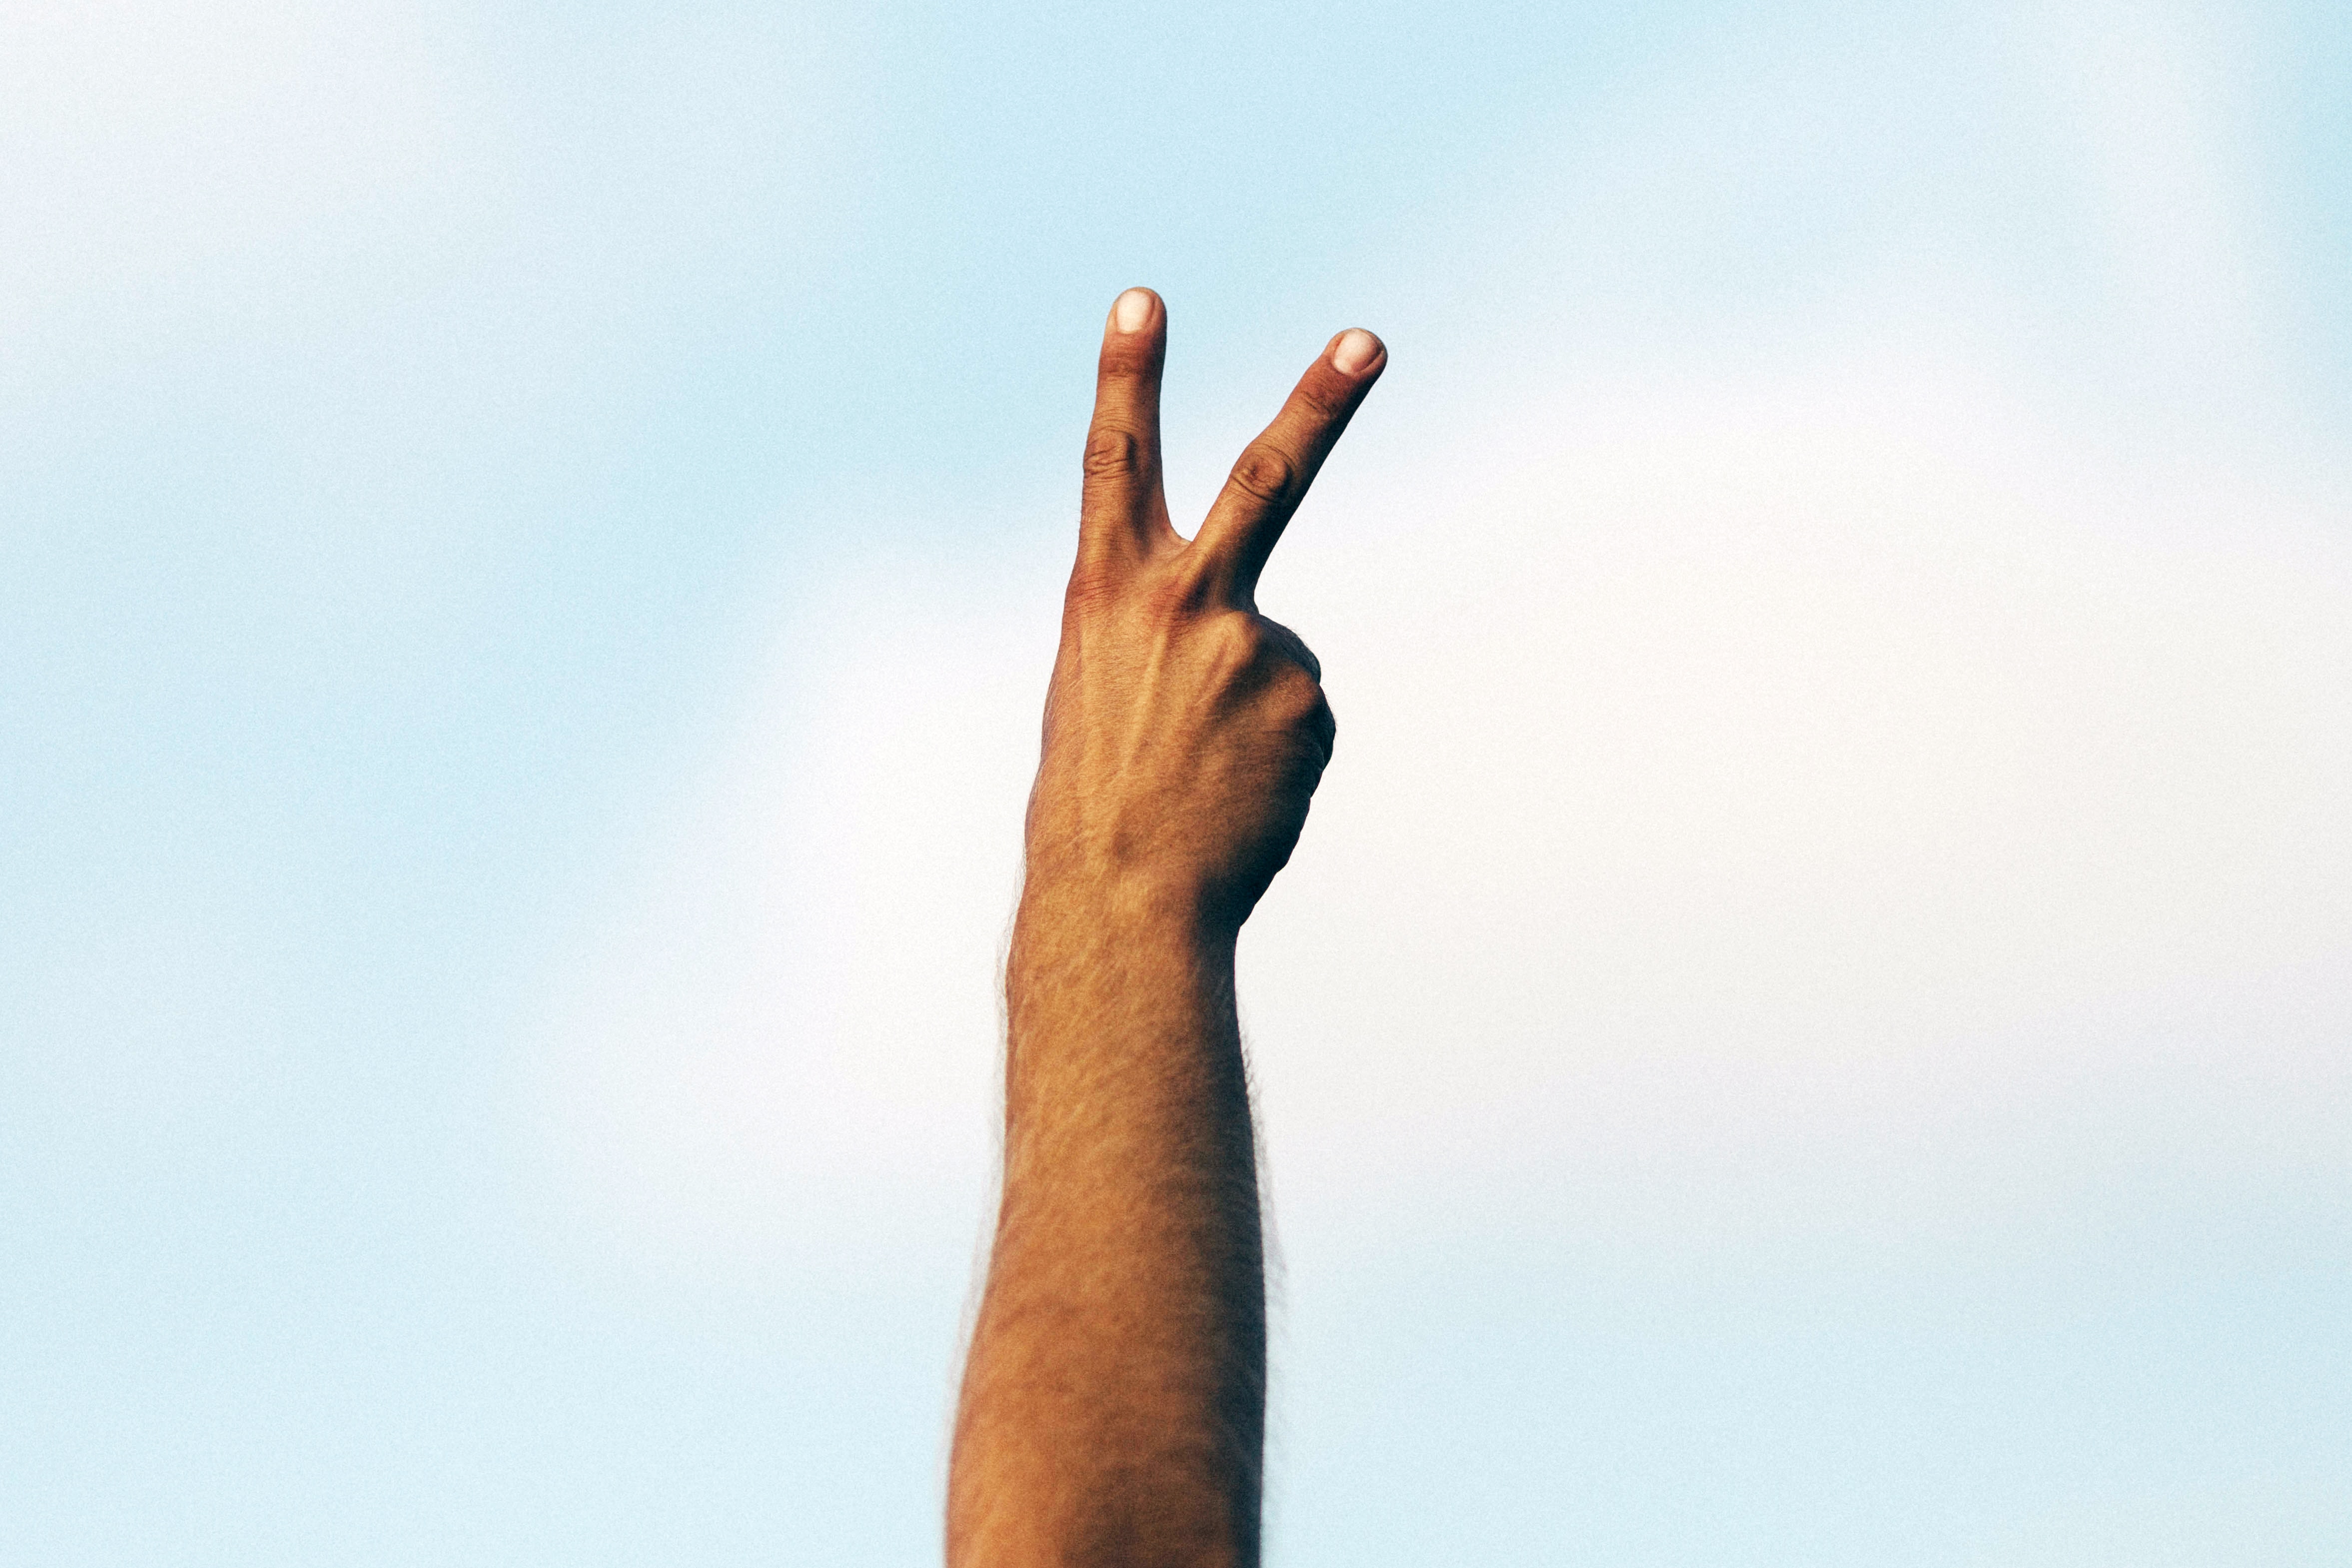 4707x3138 victory, blue, sky, person, finger, PNG image, hand, hand up, blue sky, arm, peace sign, peace Gallery HD Wallpaper